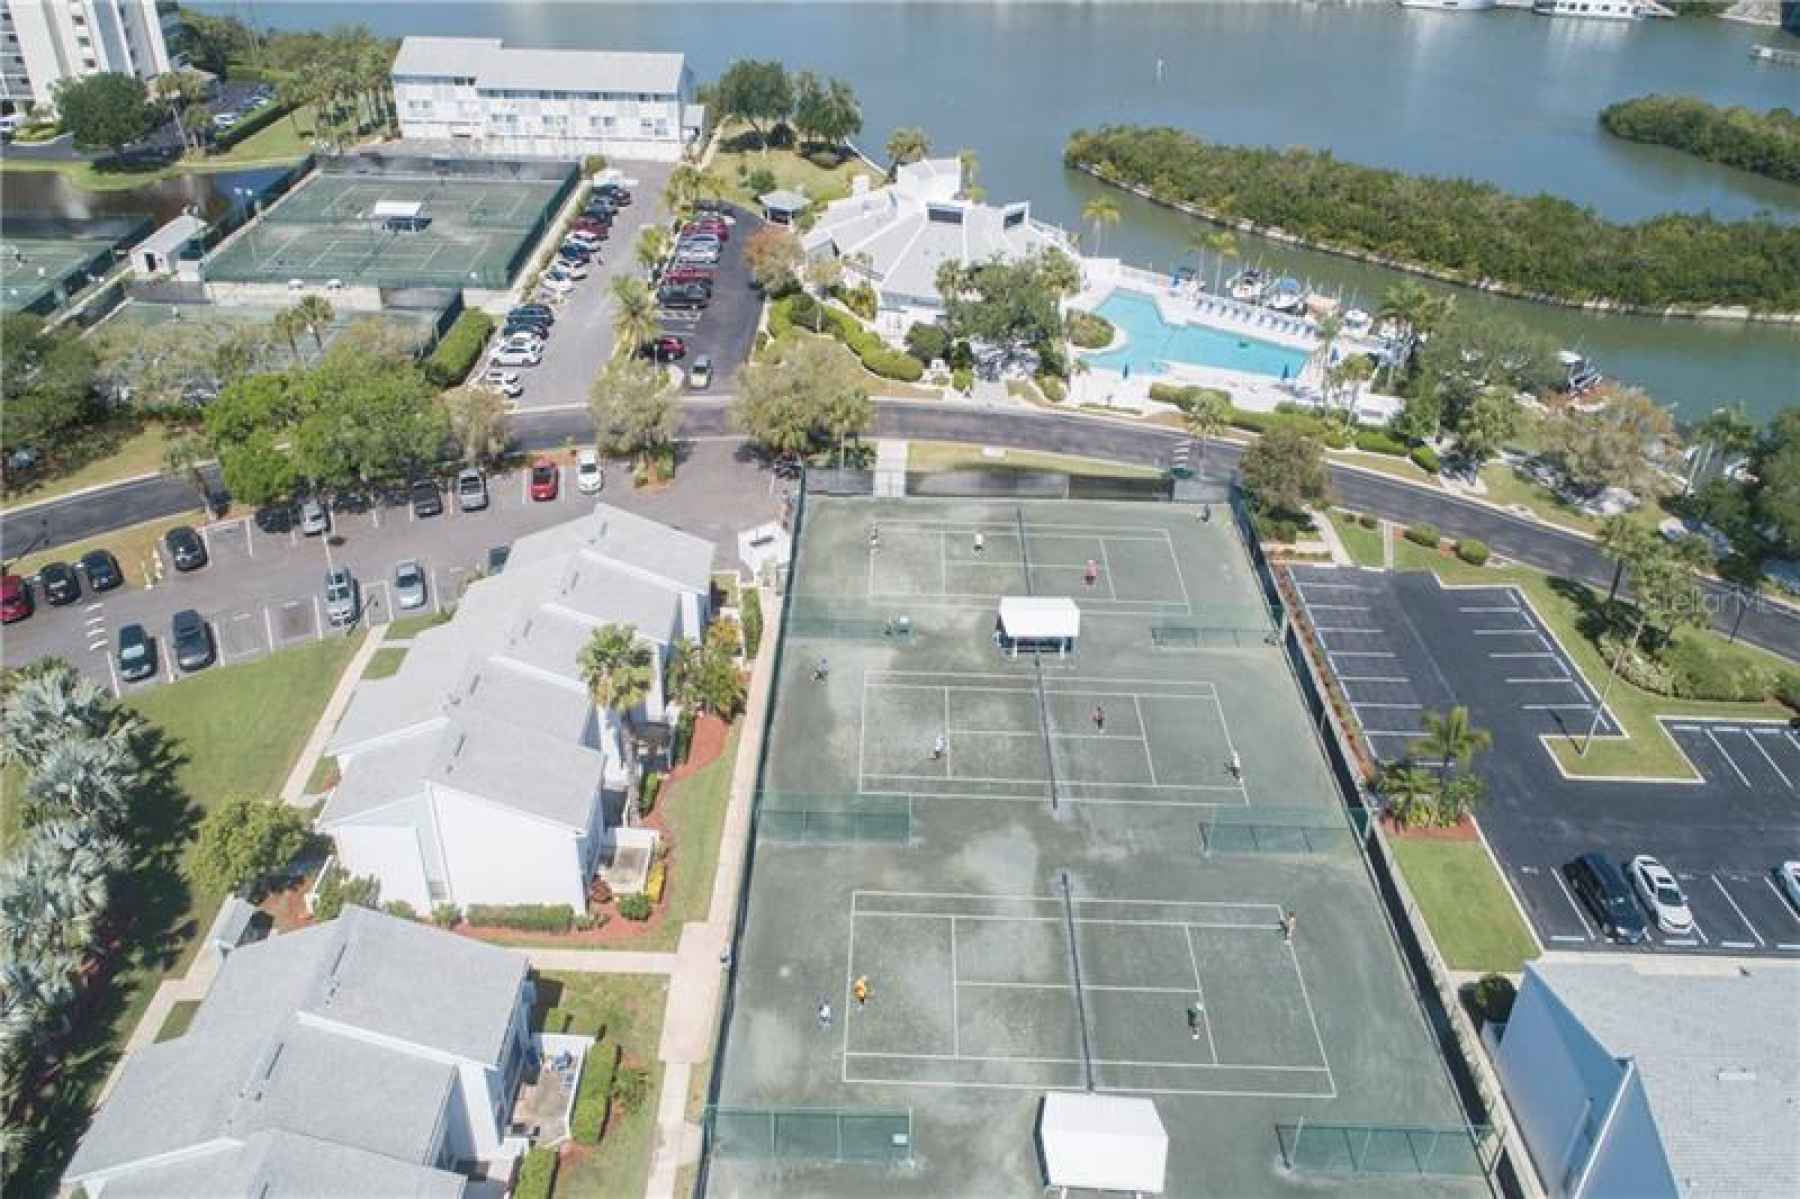 Tennis courts, clubhouse and pool